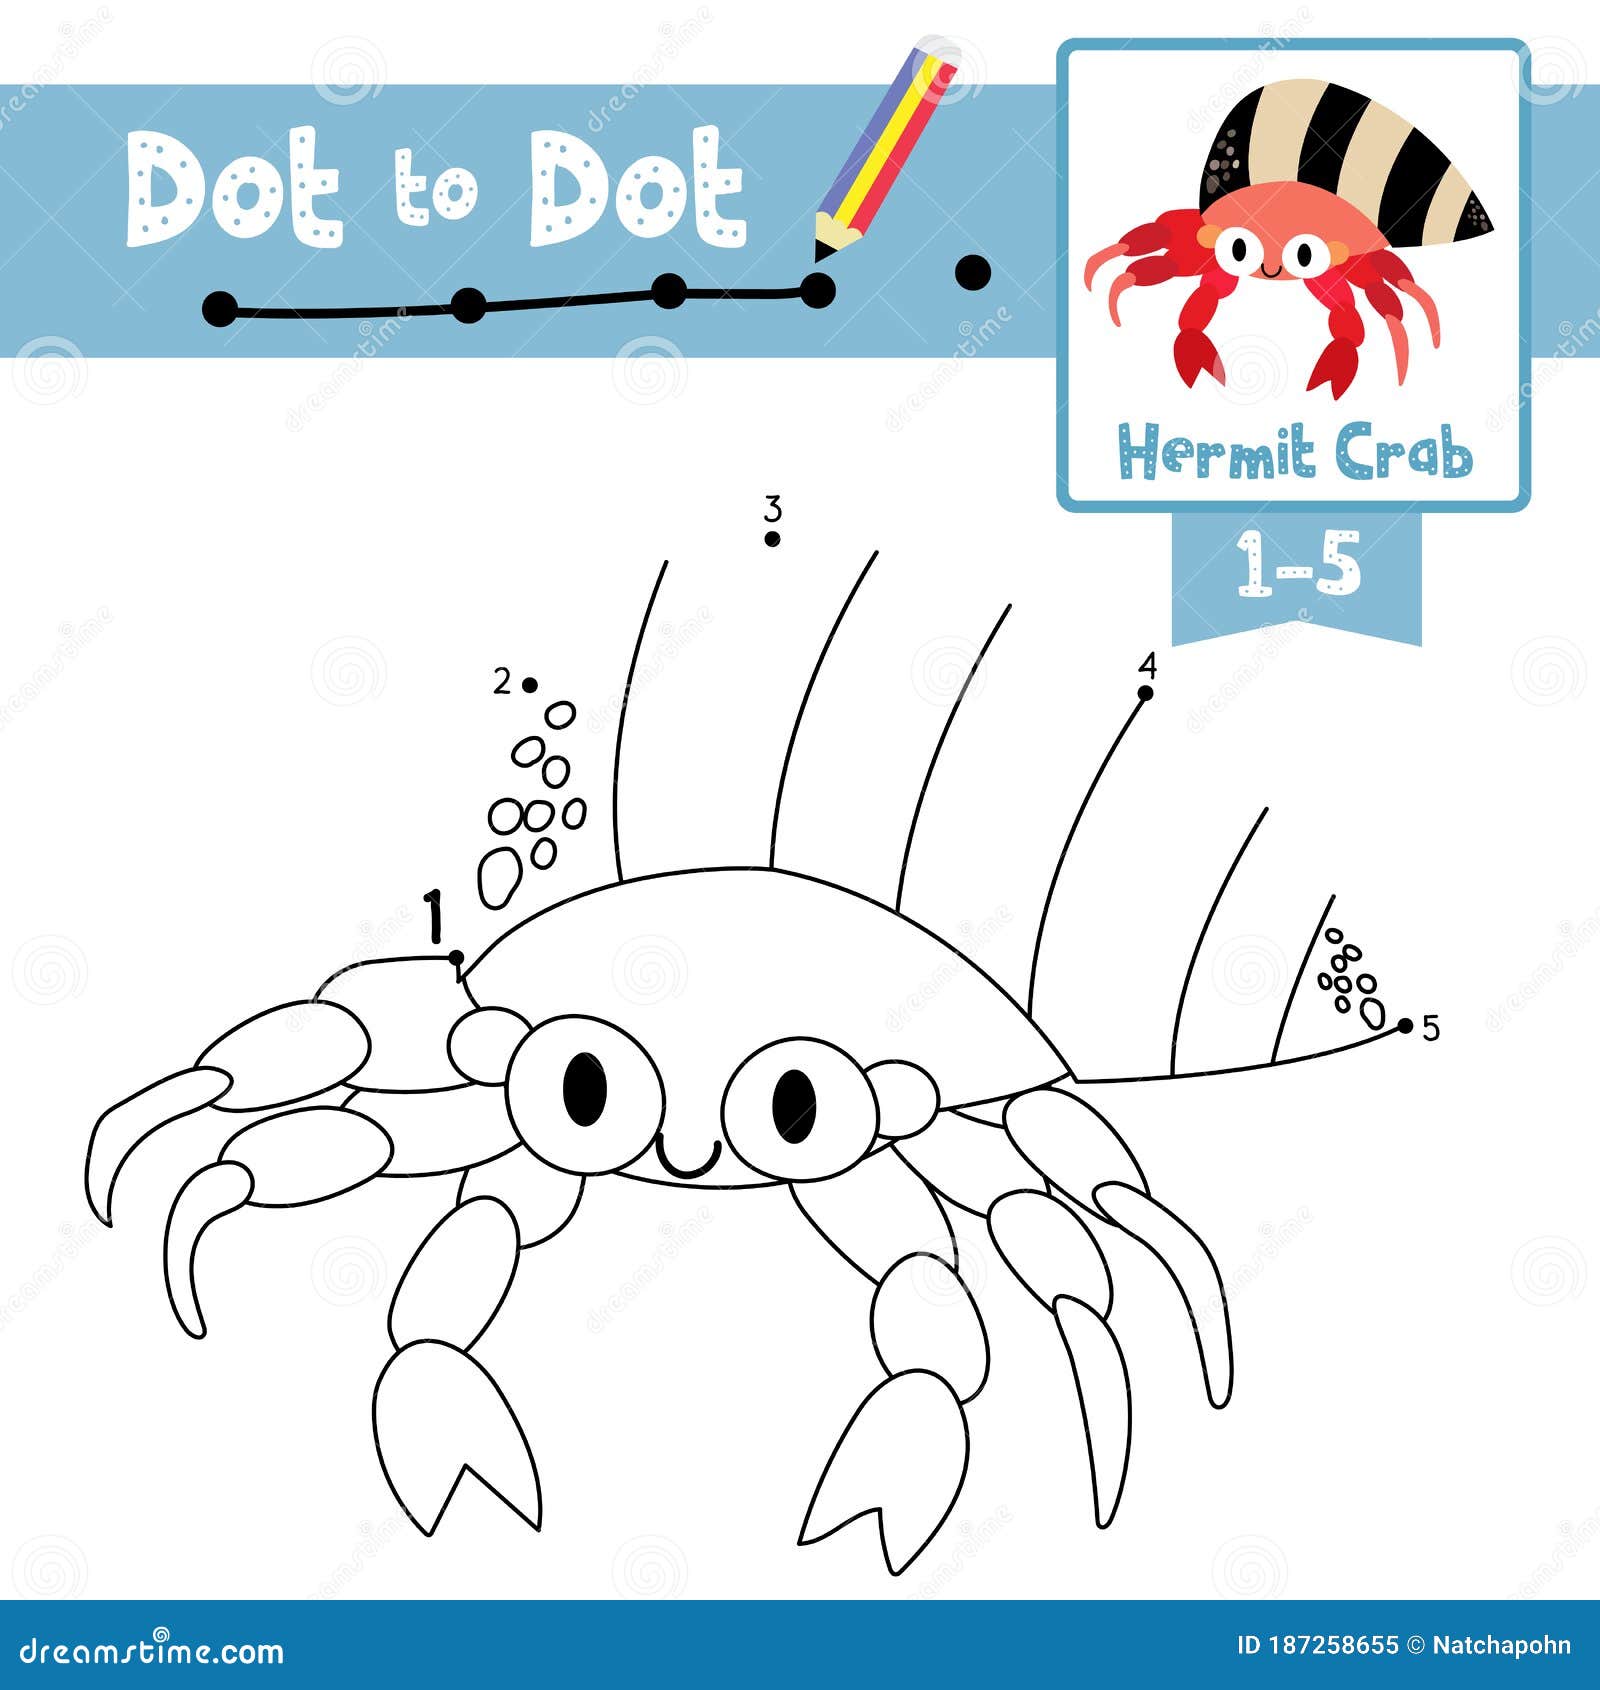 Dot To Dot Educational Game and Coloring Book Hermit Crab Animal Cartoon  Character Vector Illustration Stock Vector - Illustration of character,  line: 187258655